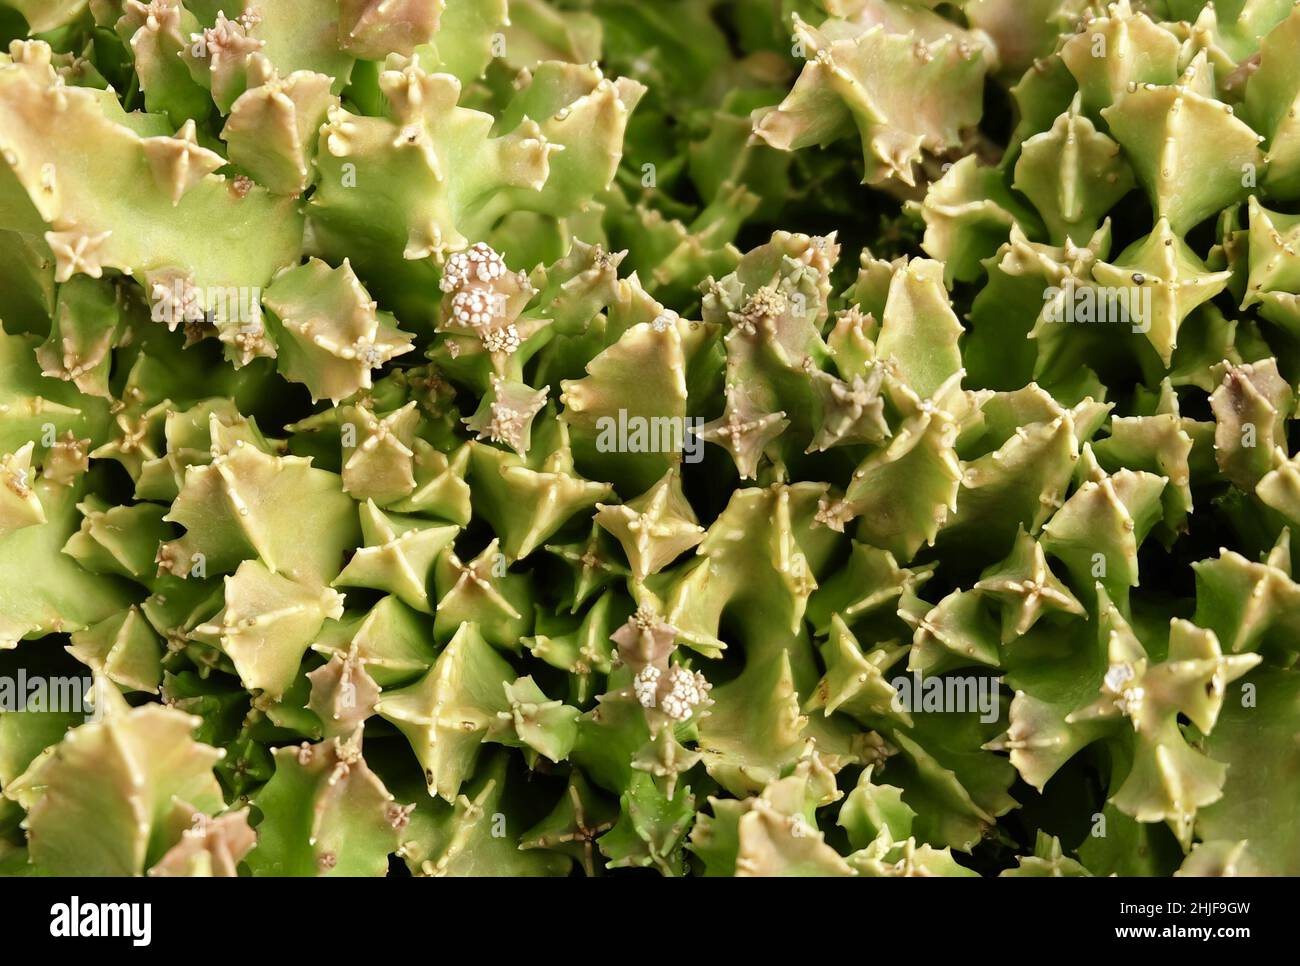 Top View of Green Huernia Plants, A Succulent Plants with Sharp Thorns for Garden Decoration. Stock Photo